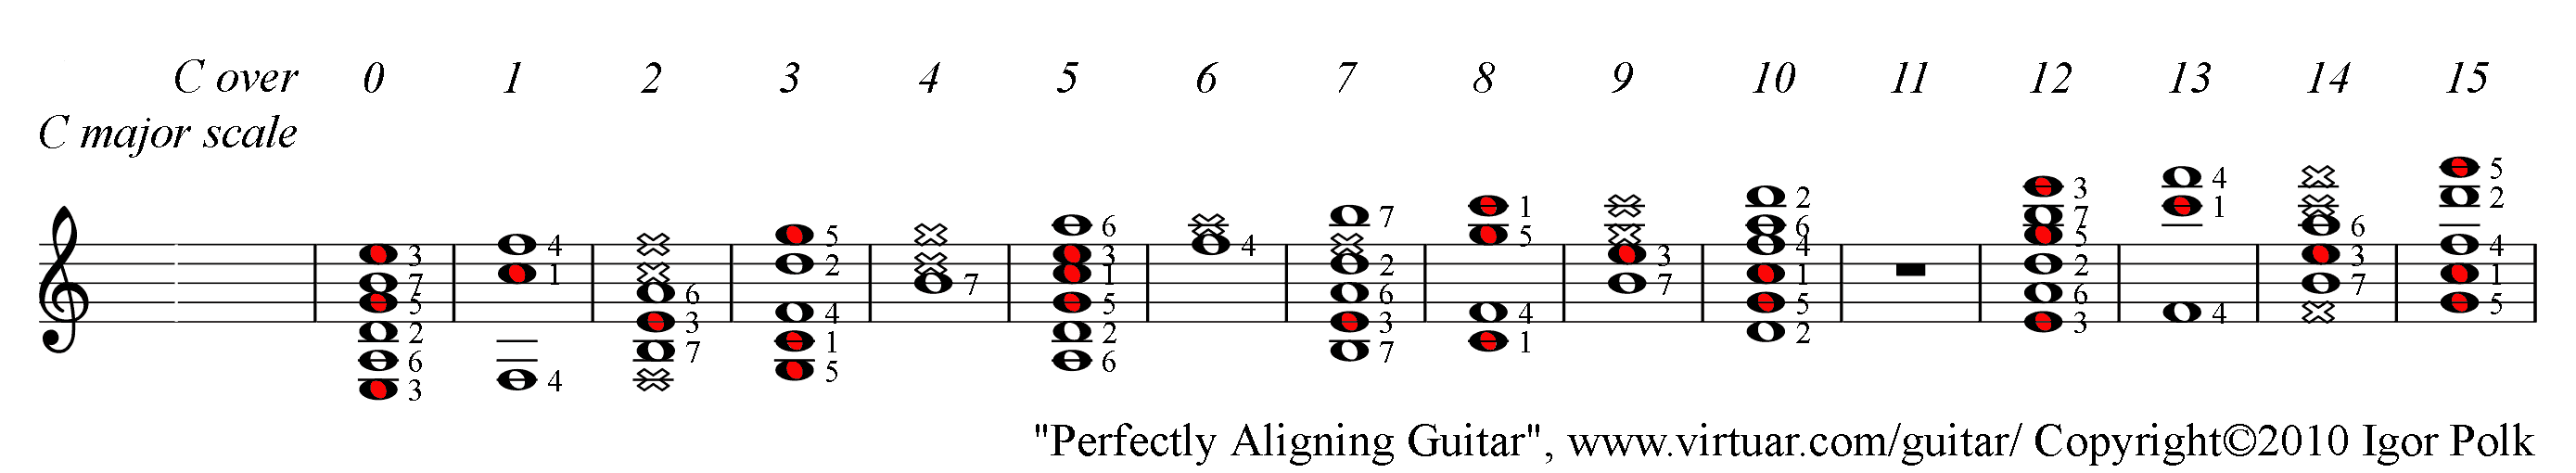 C major chord over C major scale, PAD